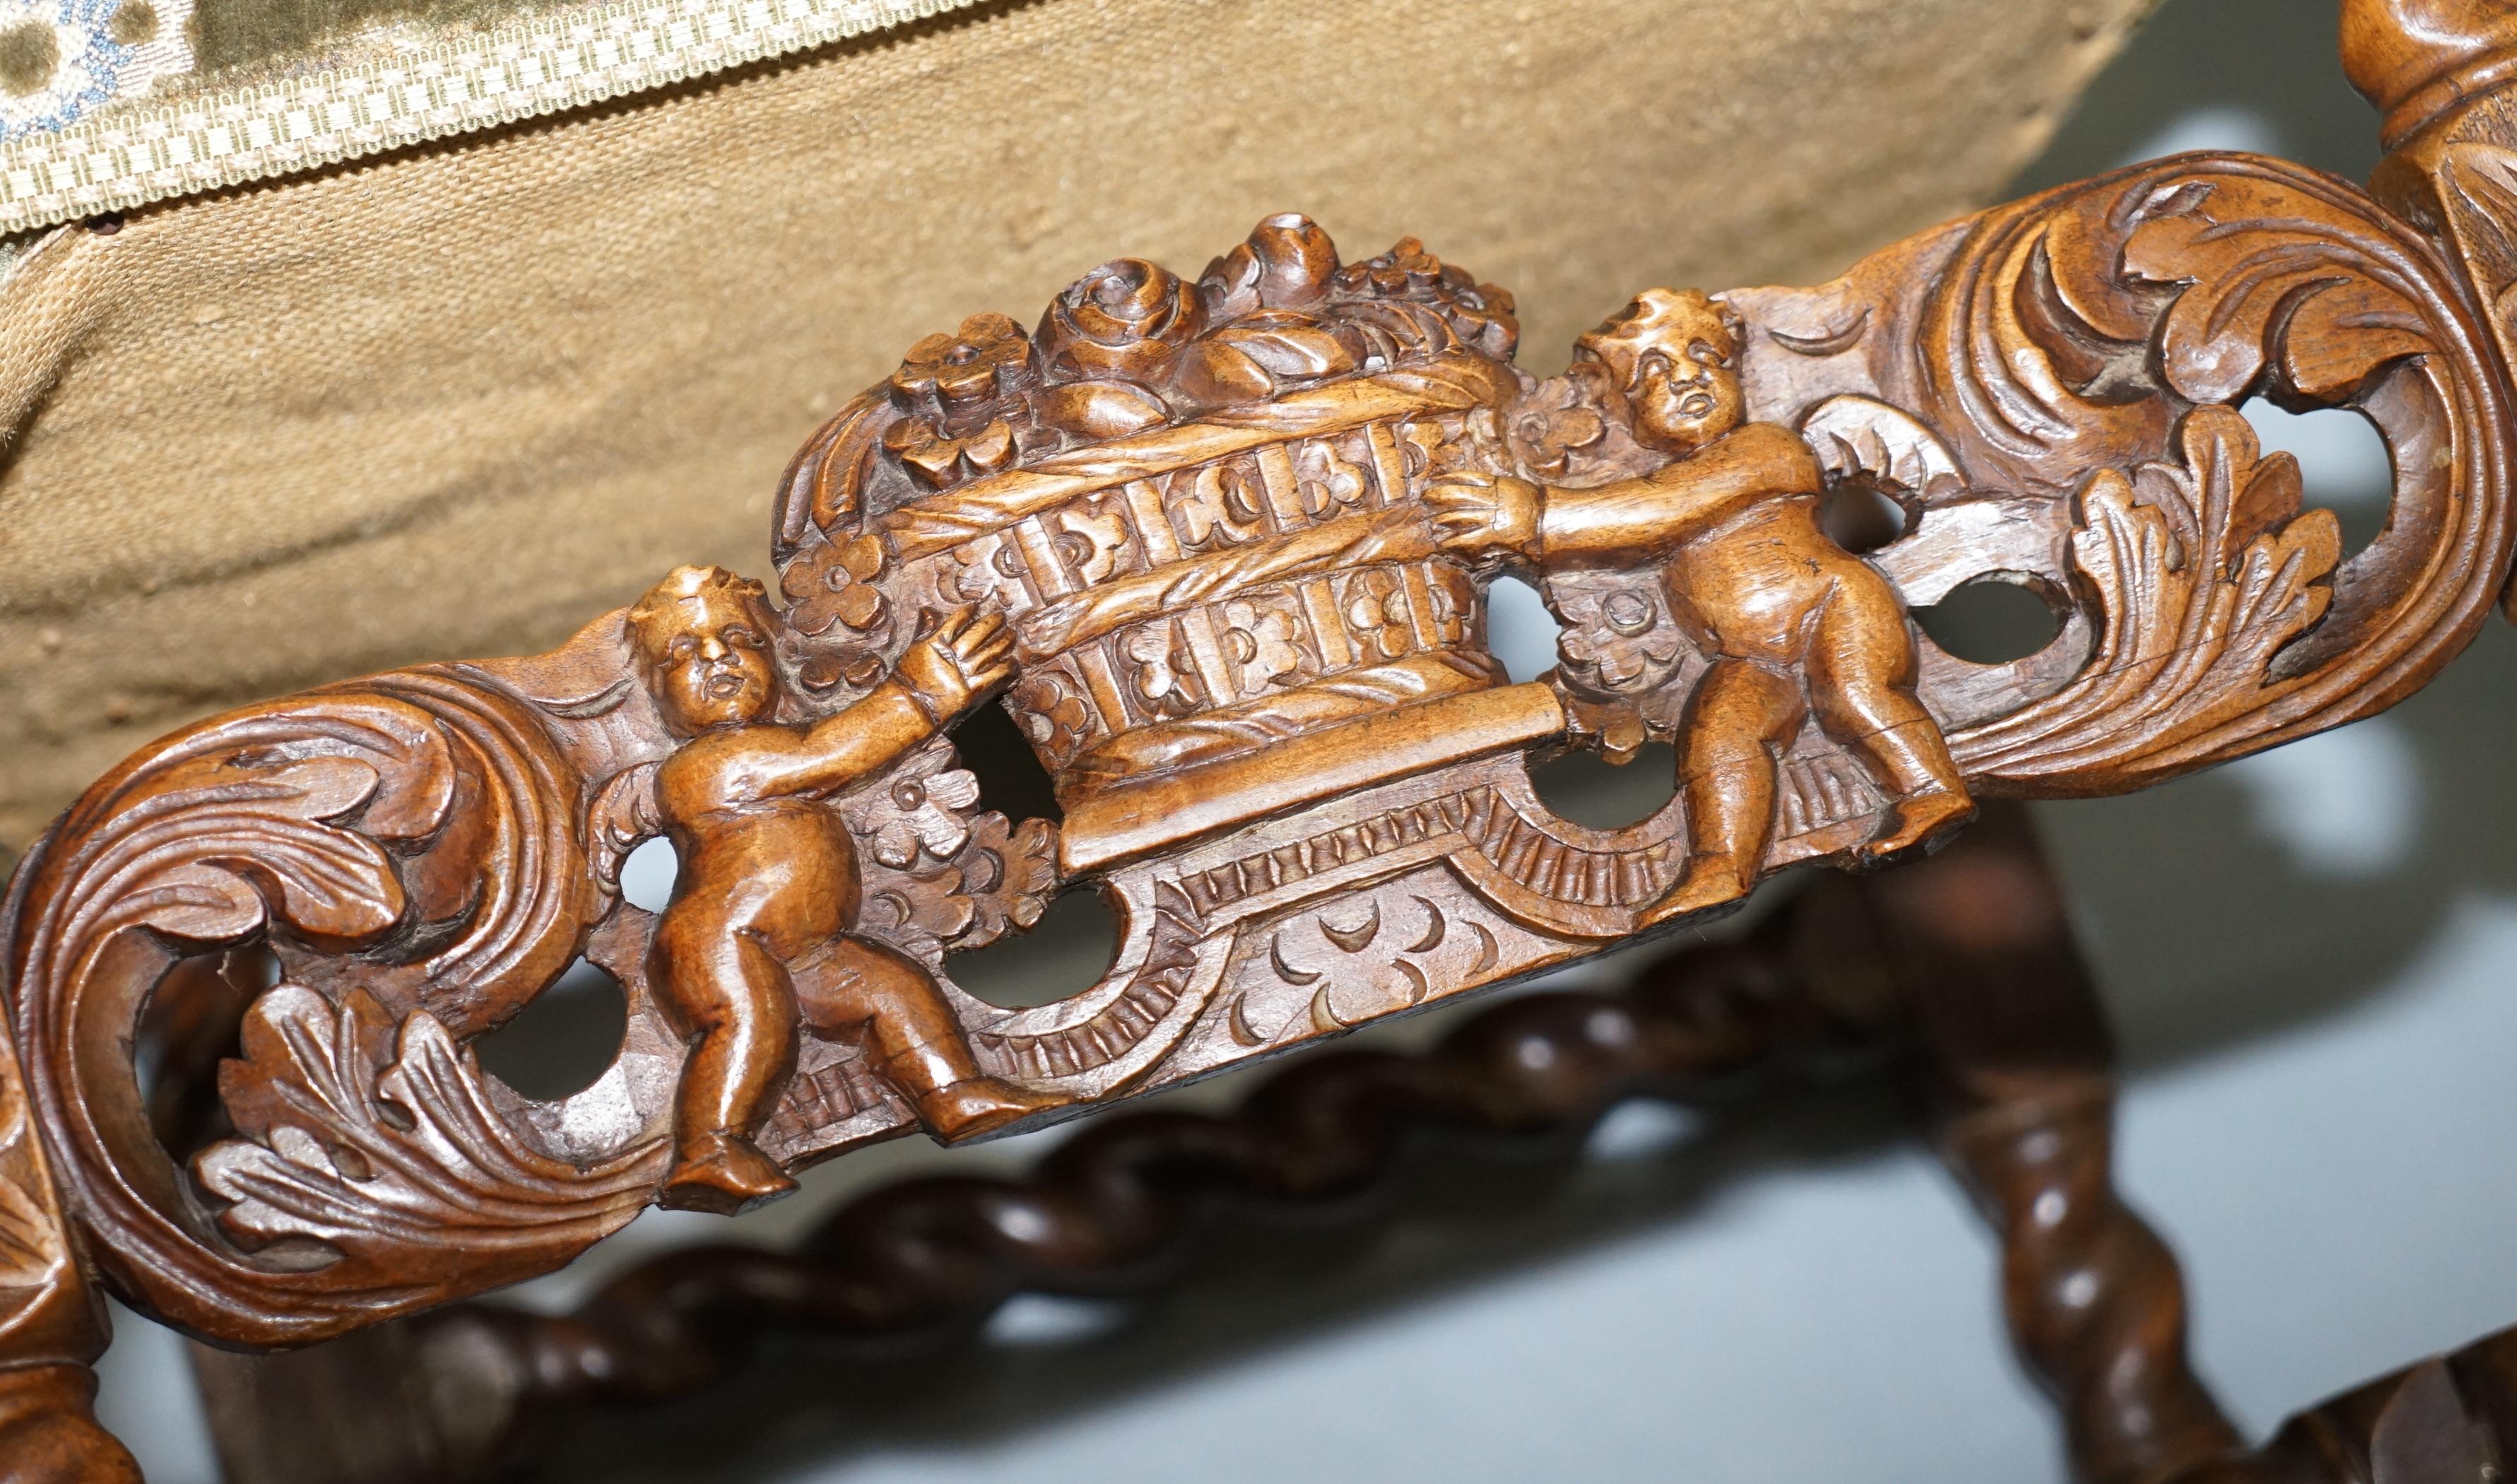 Pair of 18th Century Fruit Wood Carved Chair Cherubs Holding a Crown and Flowers For Sale 4